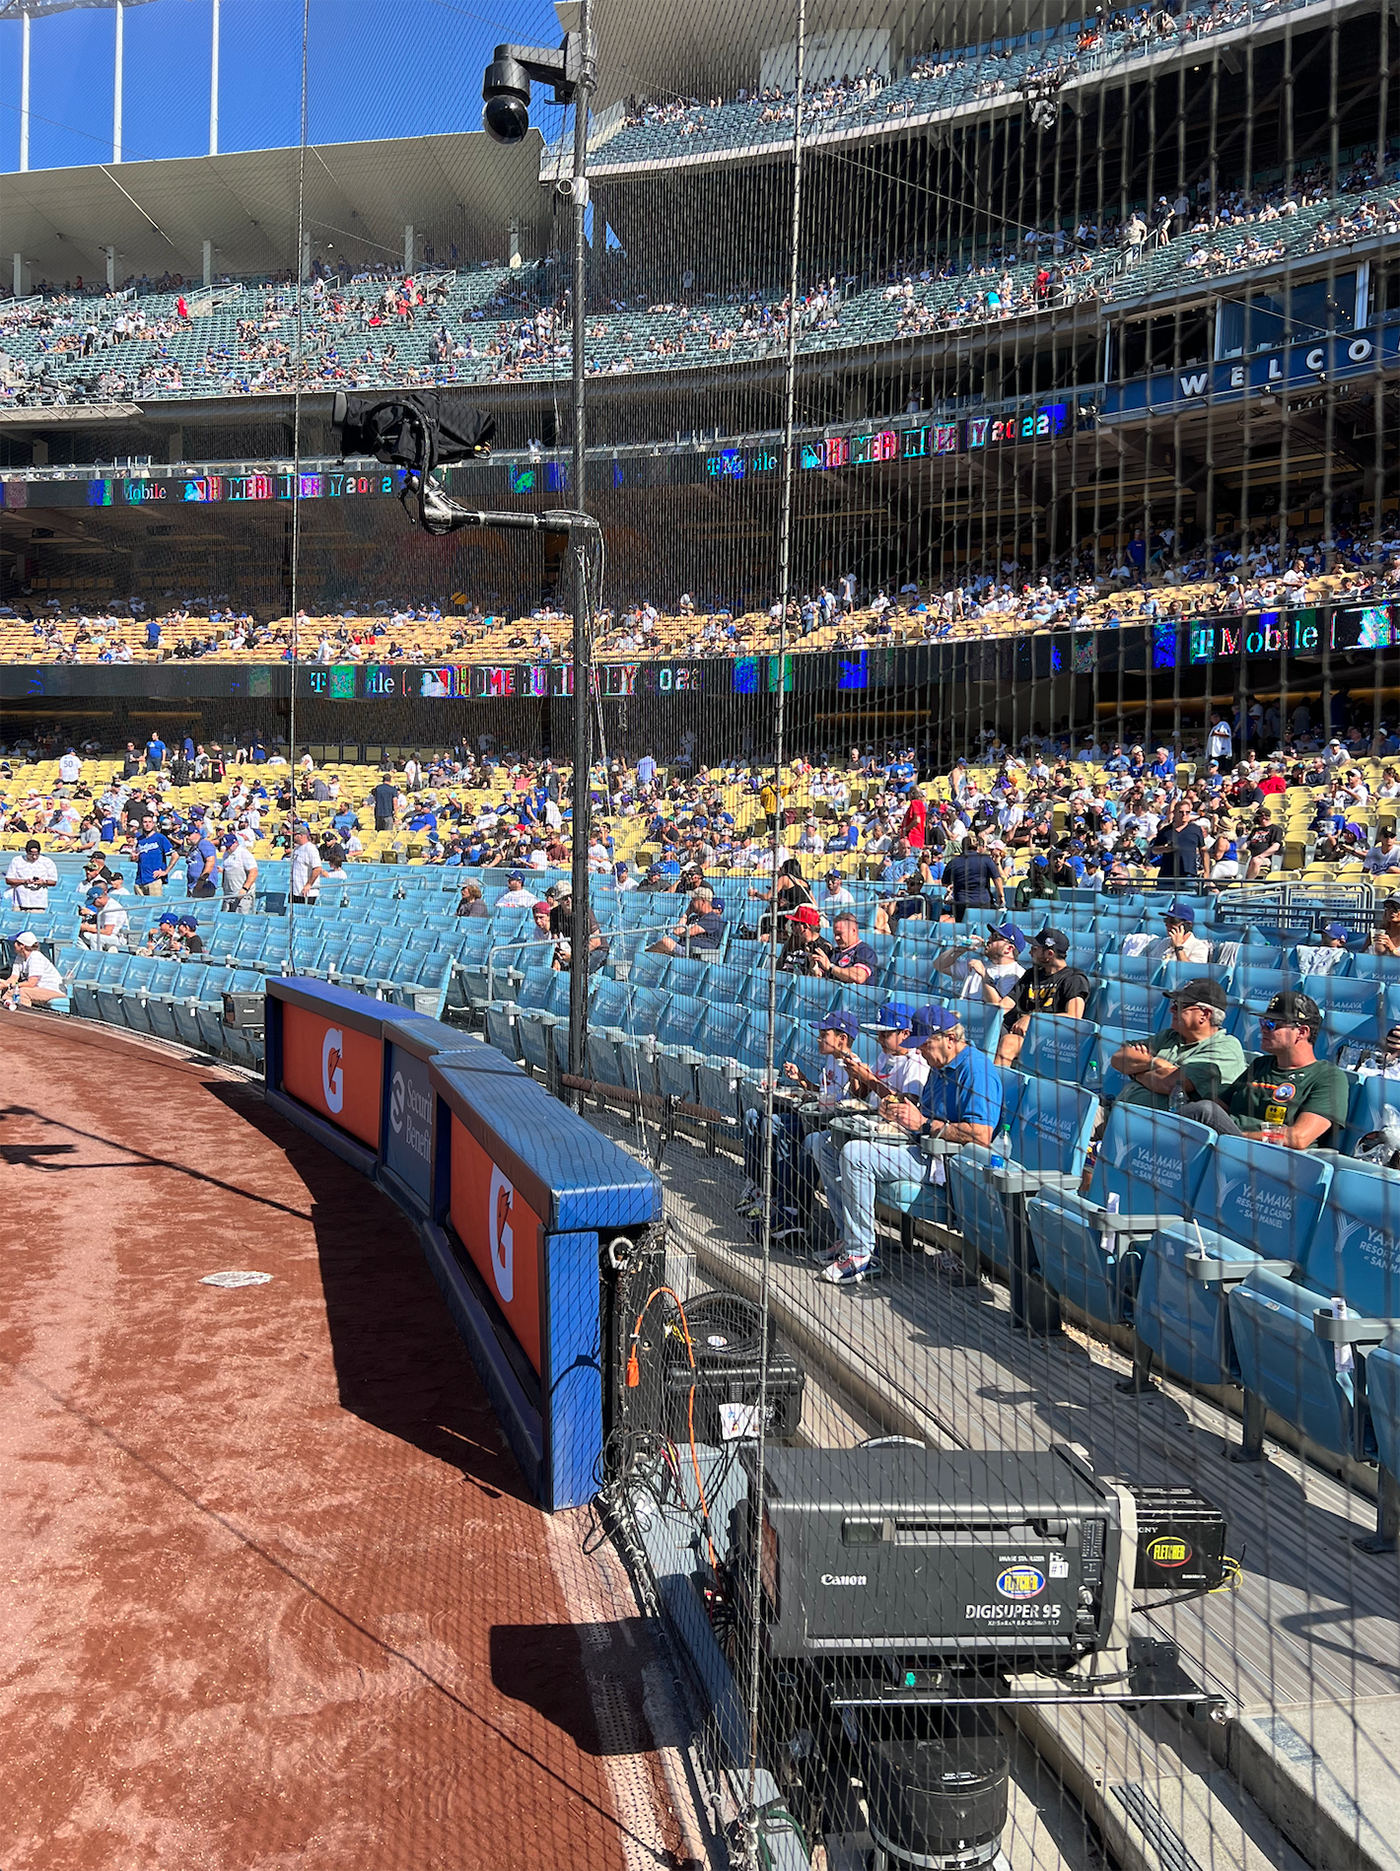 Live From MLB All-Star 2022 Fox Sports Rolls Out 70+ Cameras for 1080p HDR Show at Biggest Midsummer Classic